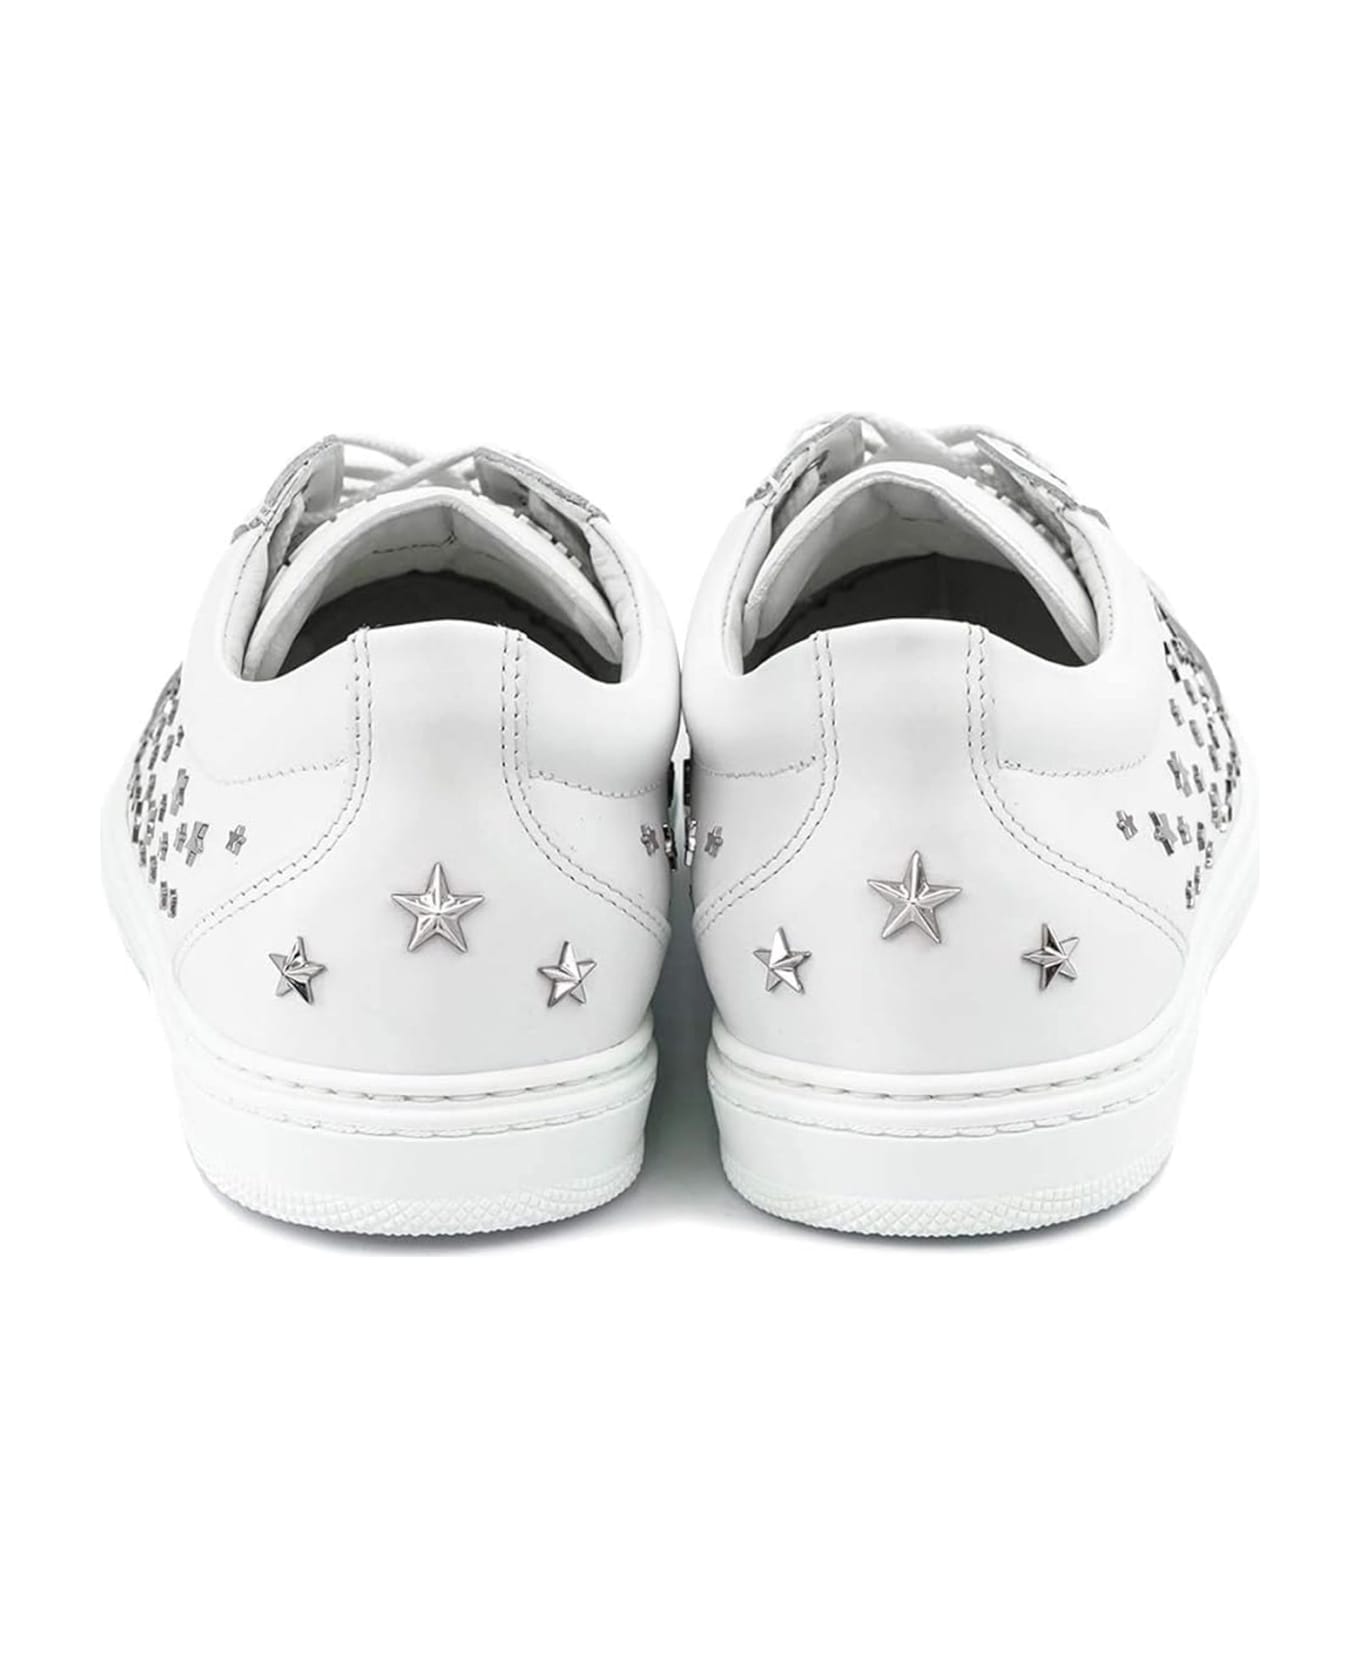 Jimmy Choo Cash Star Leather Sneakers - White スニーカー